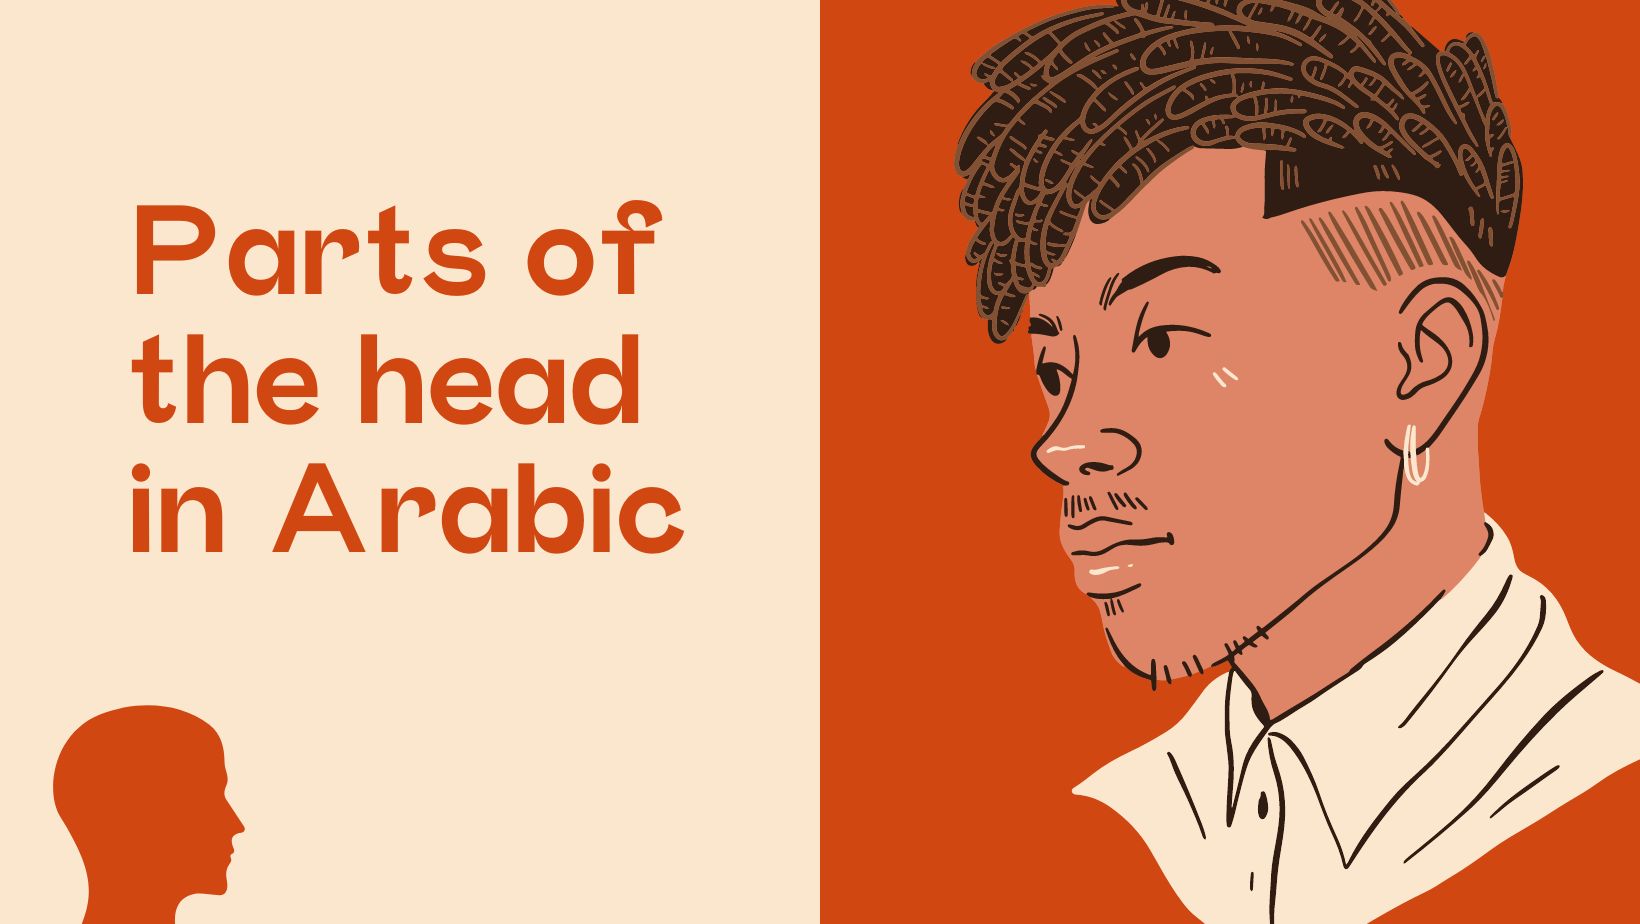 Parts of the head in Arabic